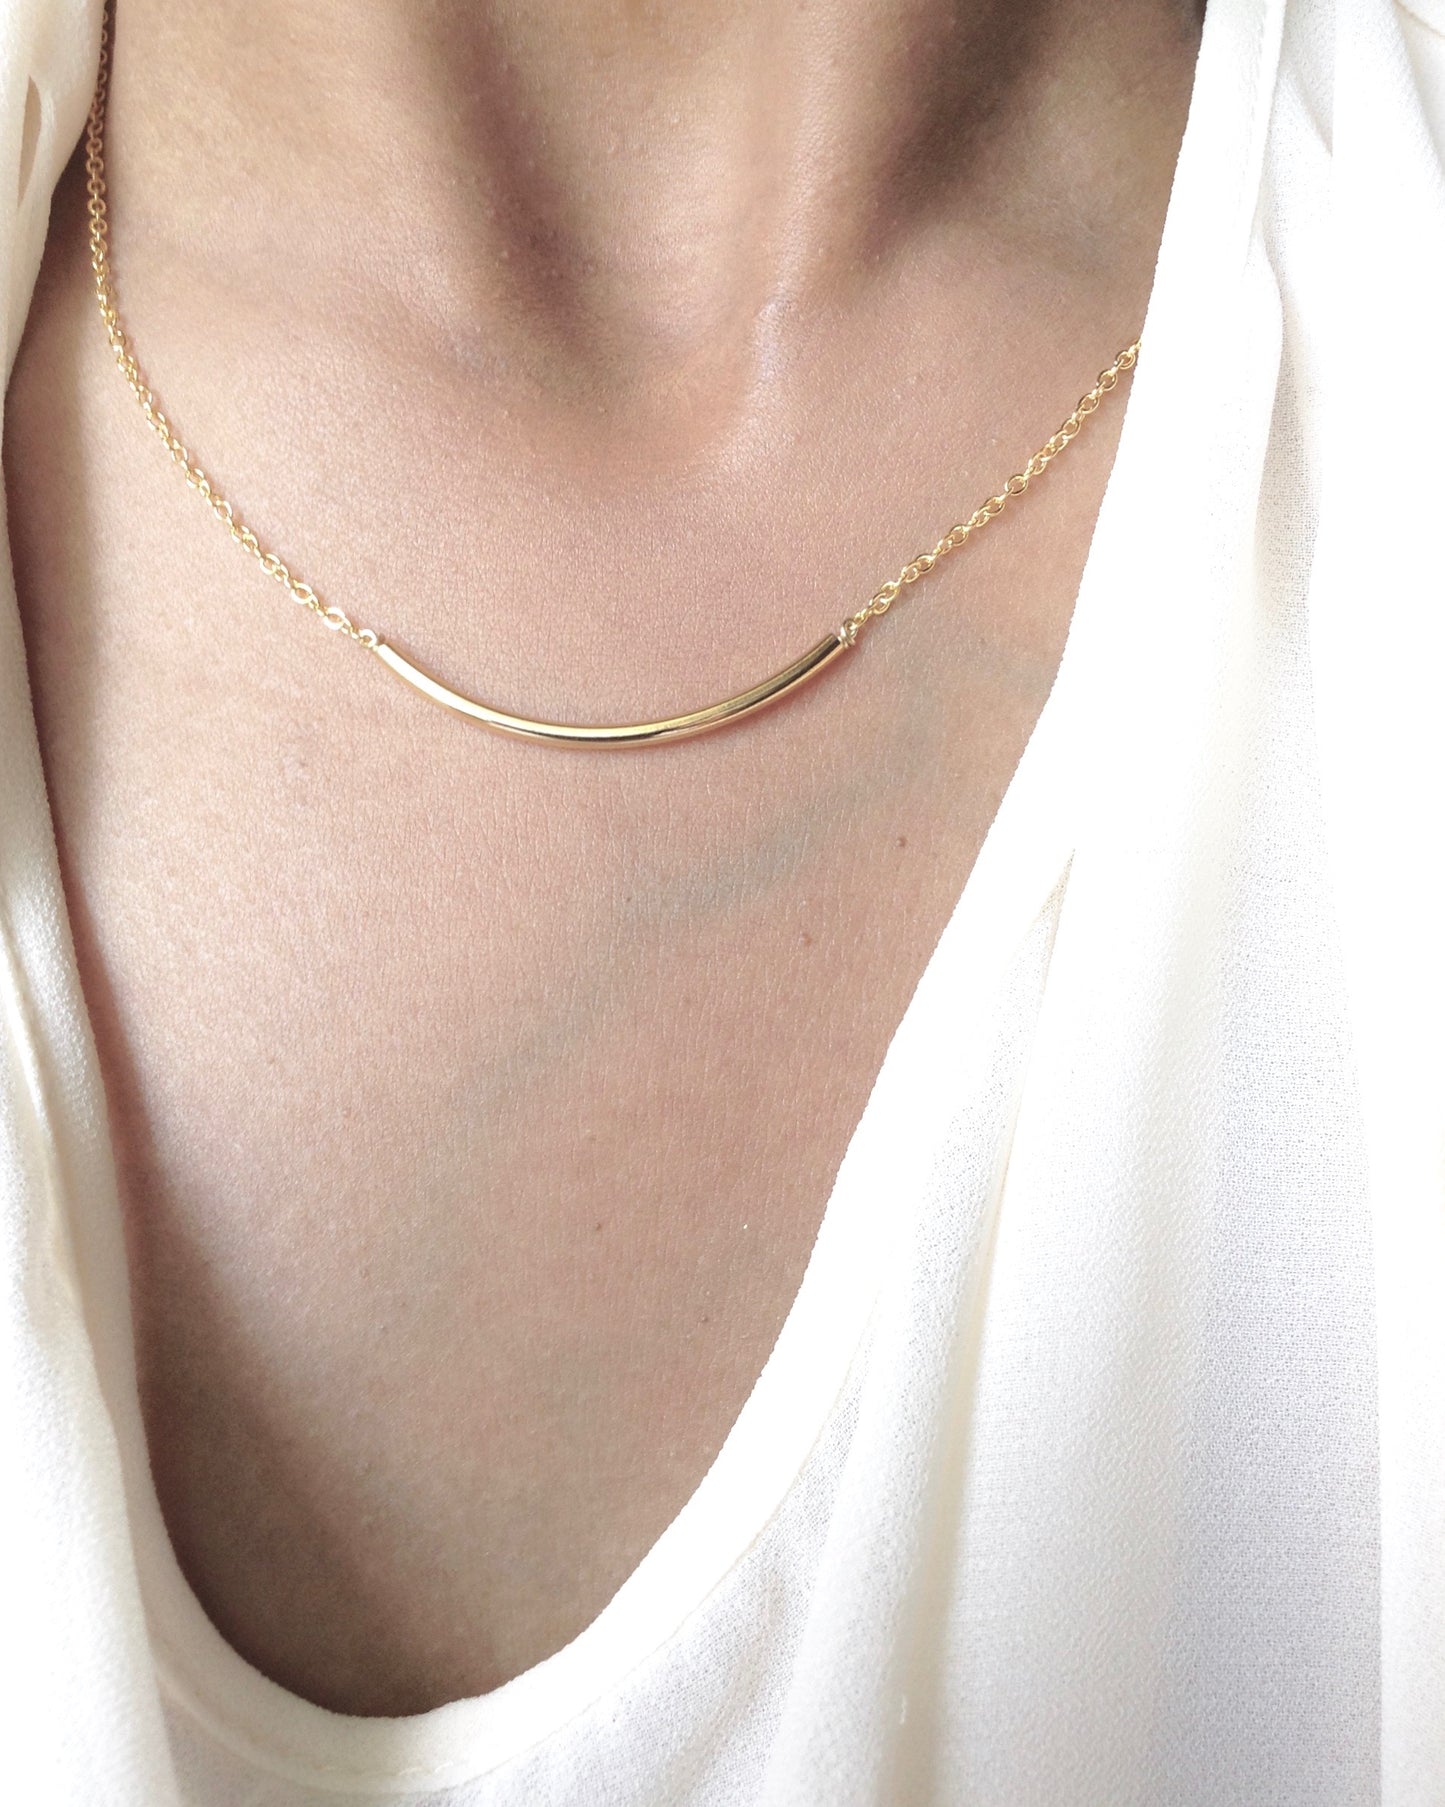 Thin Bar Necklace in Gold Filled or Sterling Silver | Minimalist Everyday Necklace | IB Jewelry